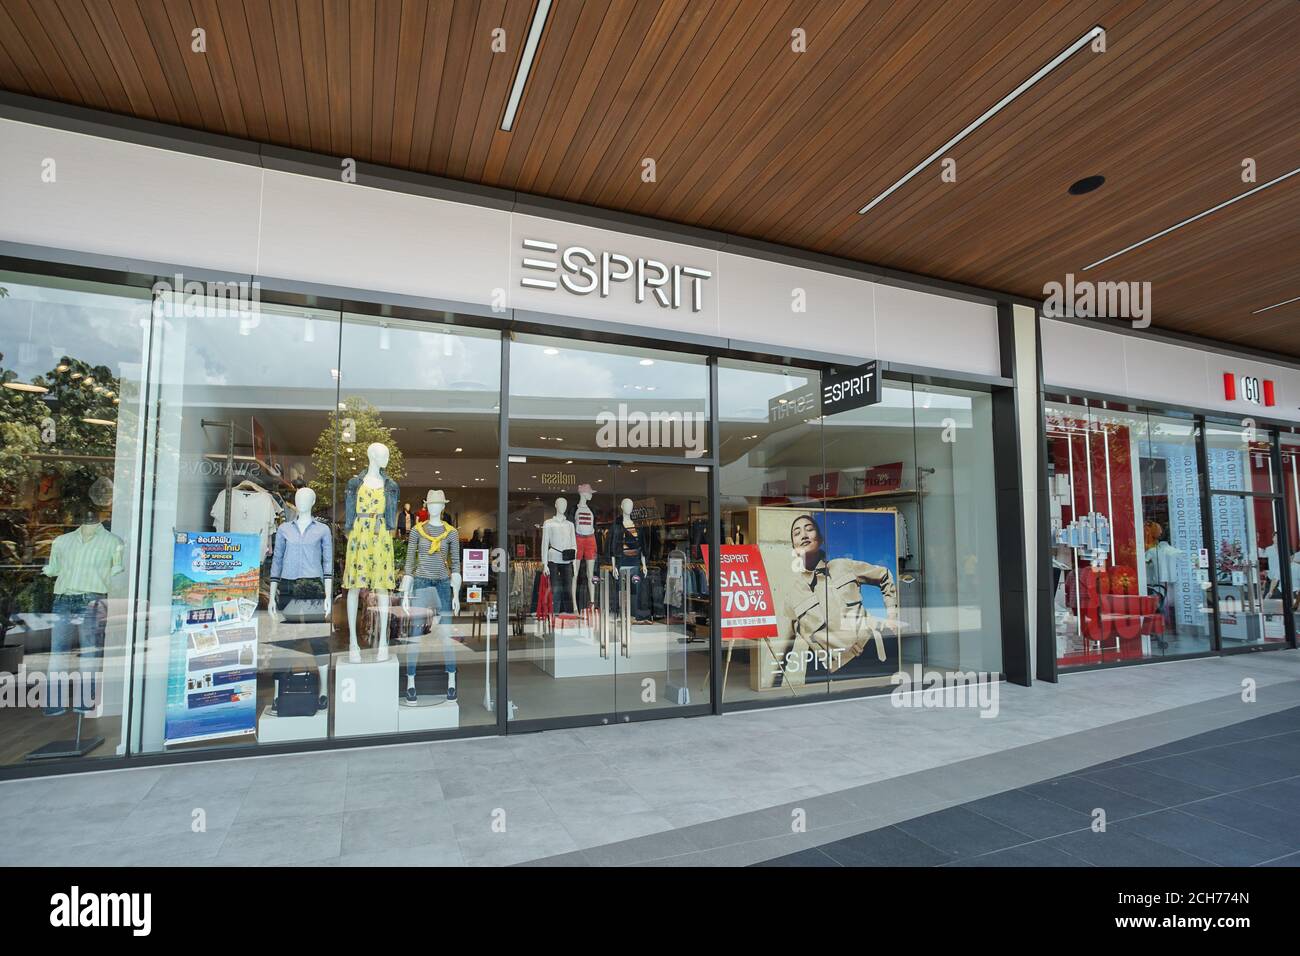 Samut Prakan, Thailand - July 28, 2020: Esprit shop in Siam Premium Outlets  Bangkok. Esprit is a fashion brand was founded in California by couple Sus  Stock Photo - Alamy